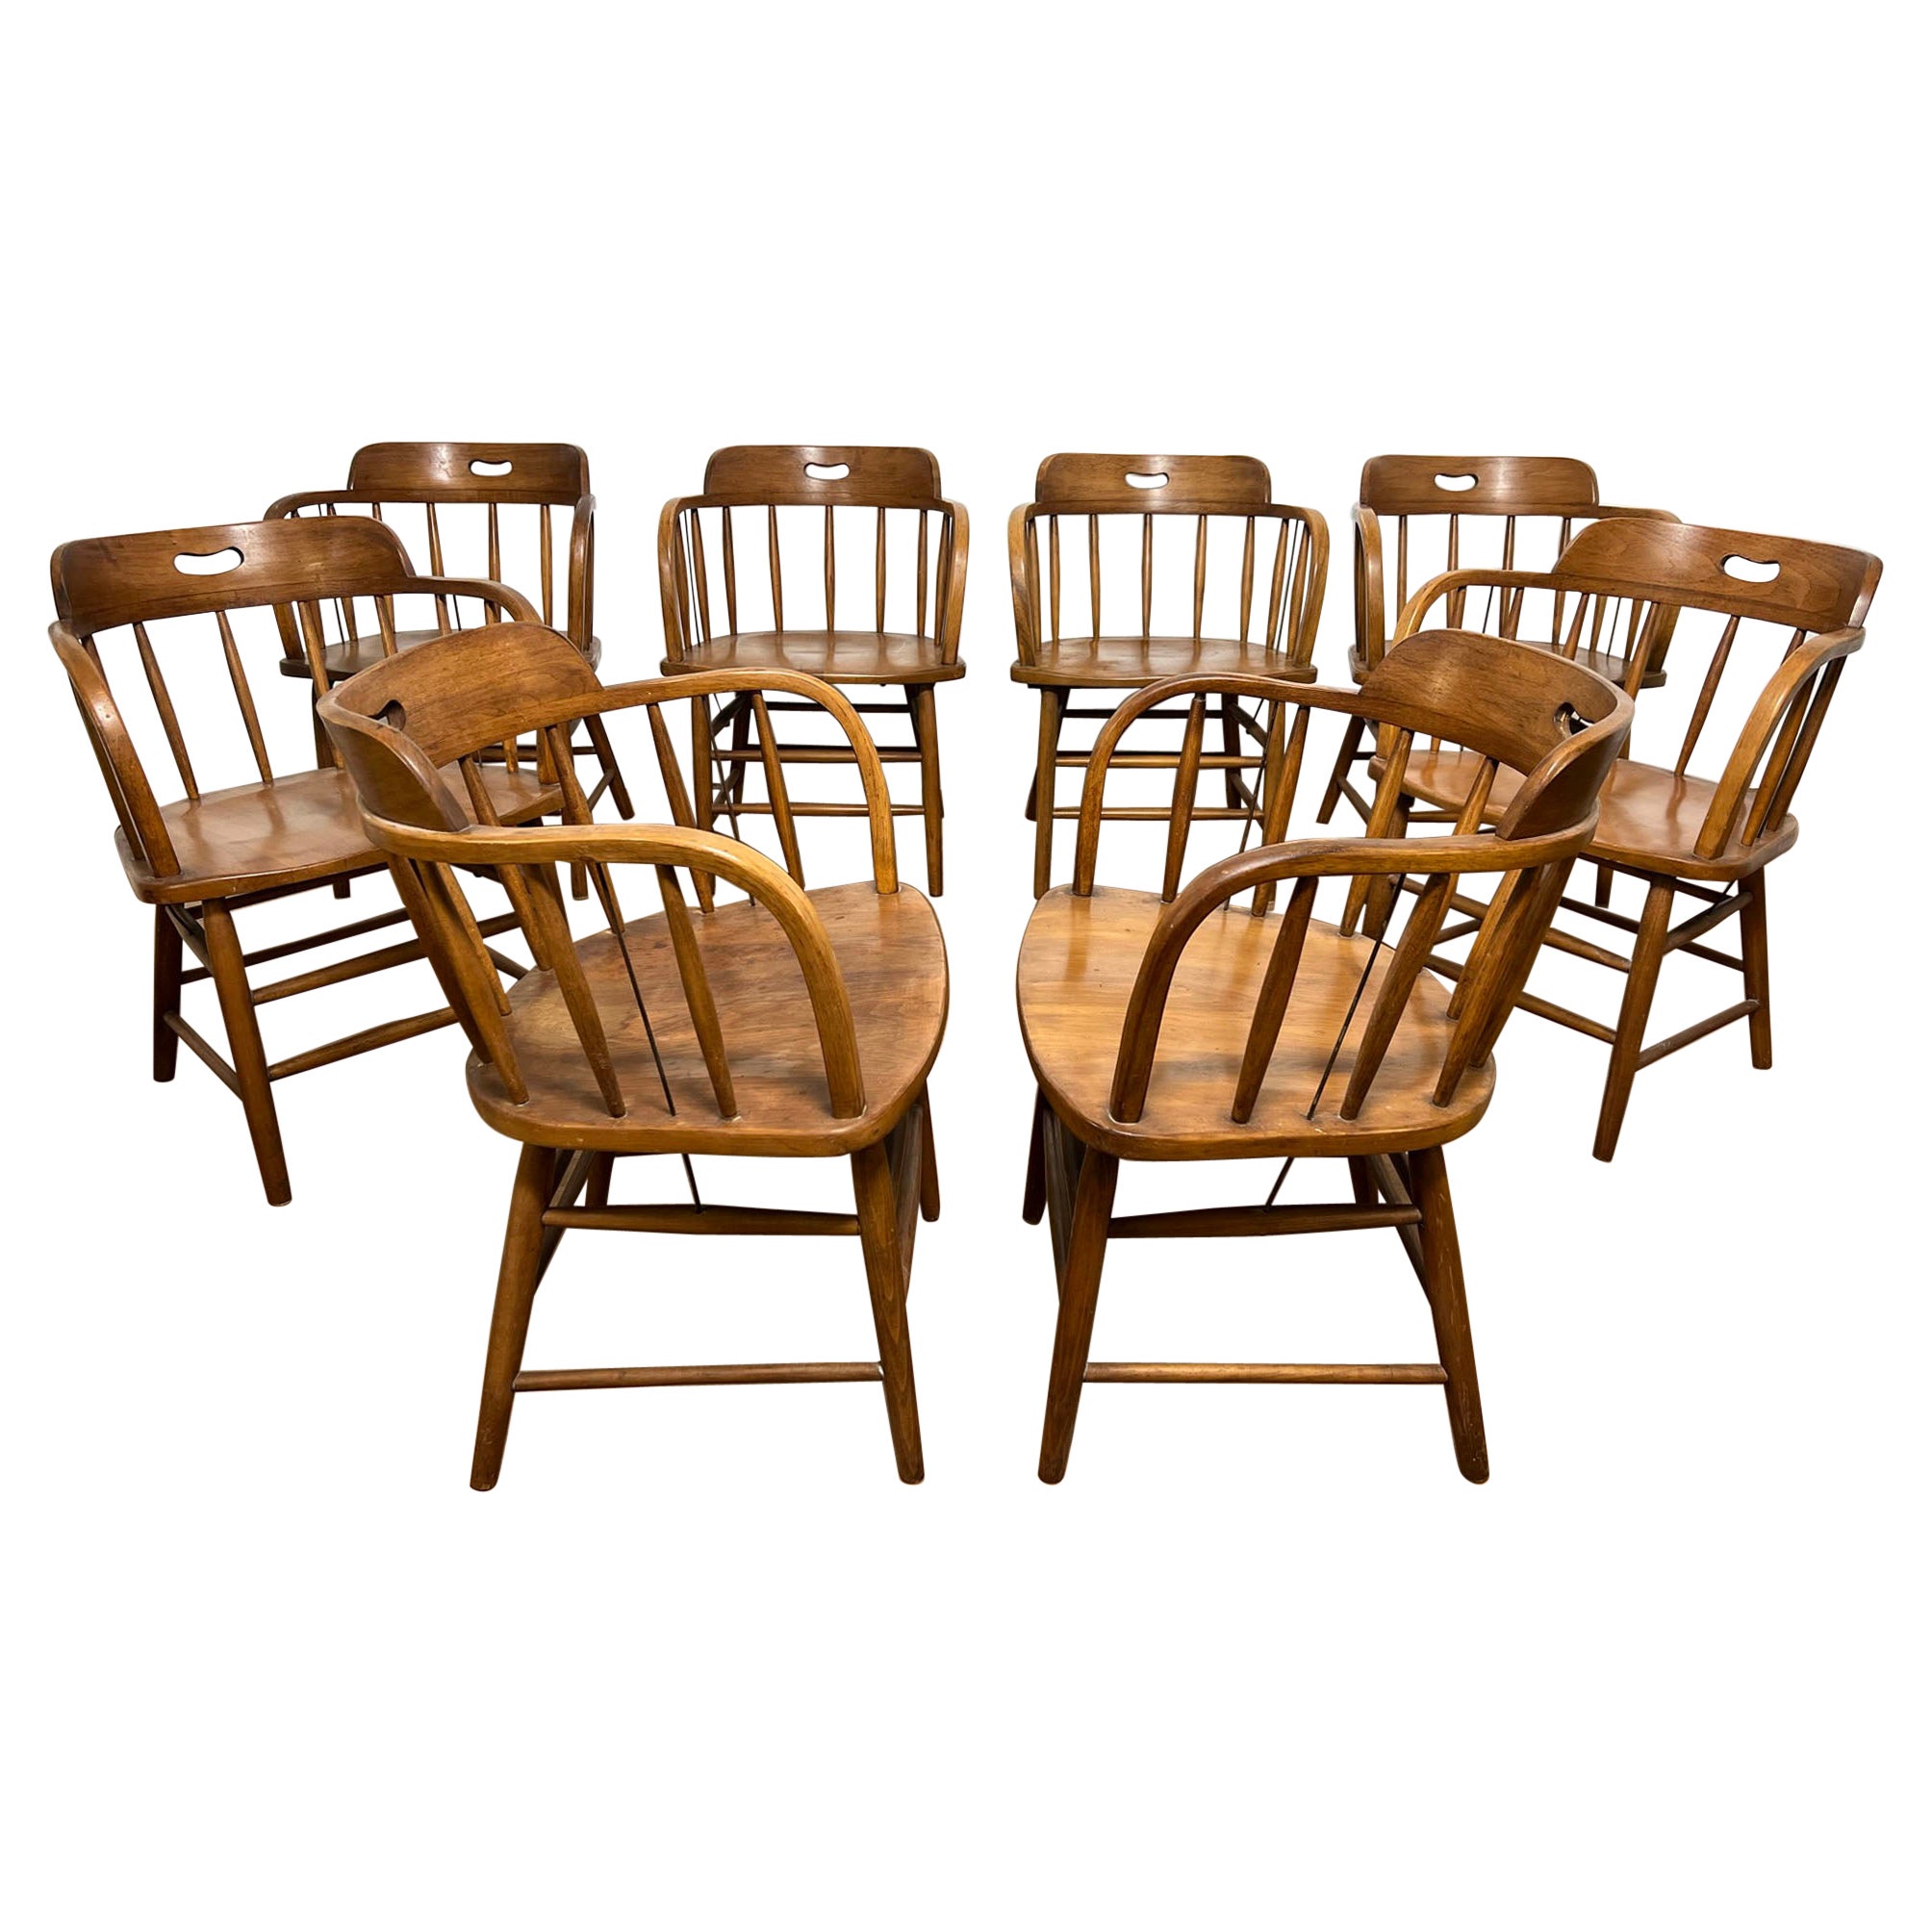 Set of Eight Boling Chair Company "Georgia O'Keeffe" Dining Chairs, circa 1940s